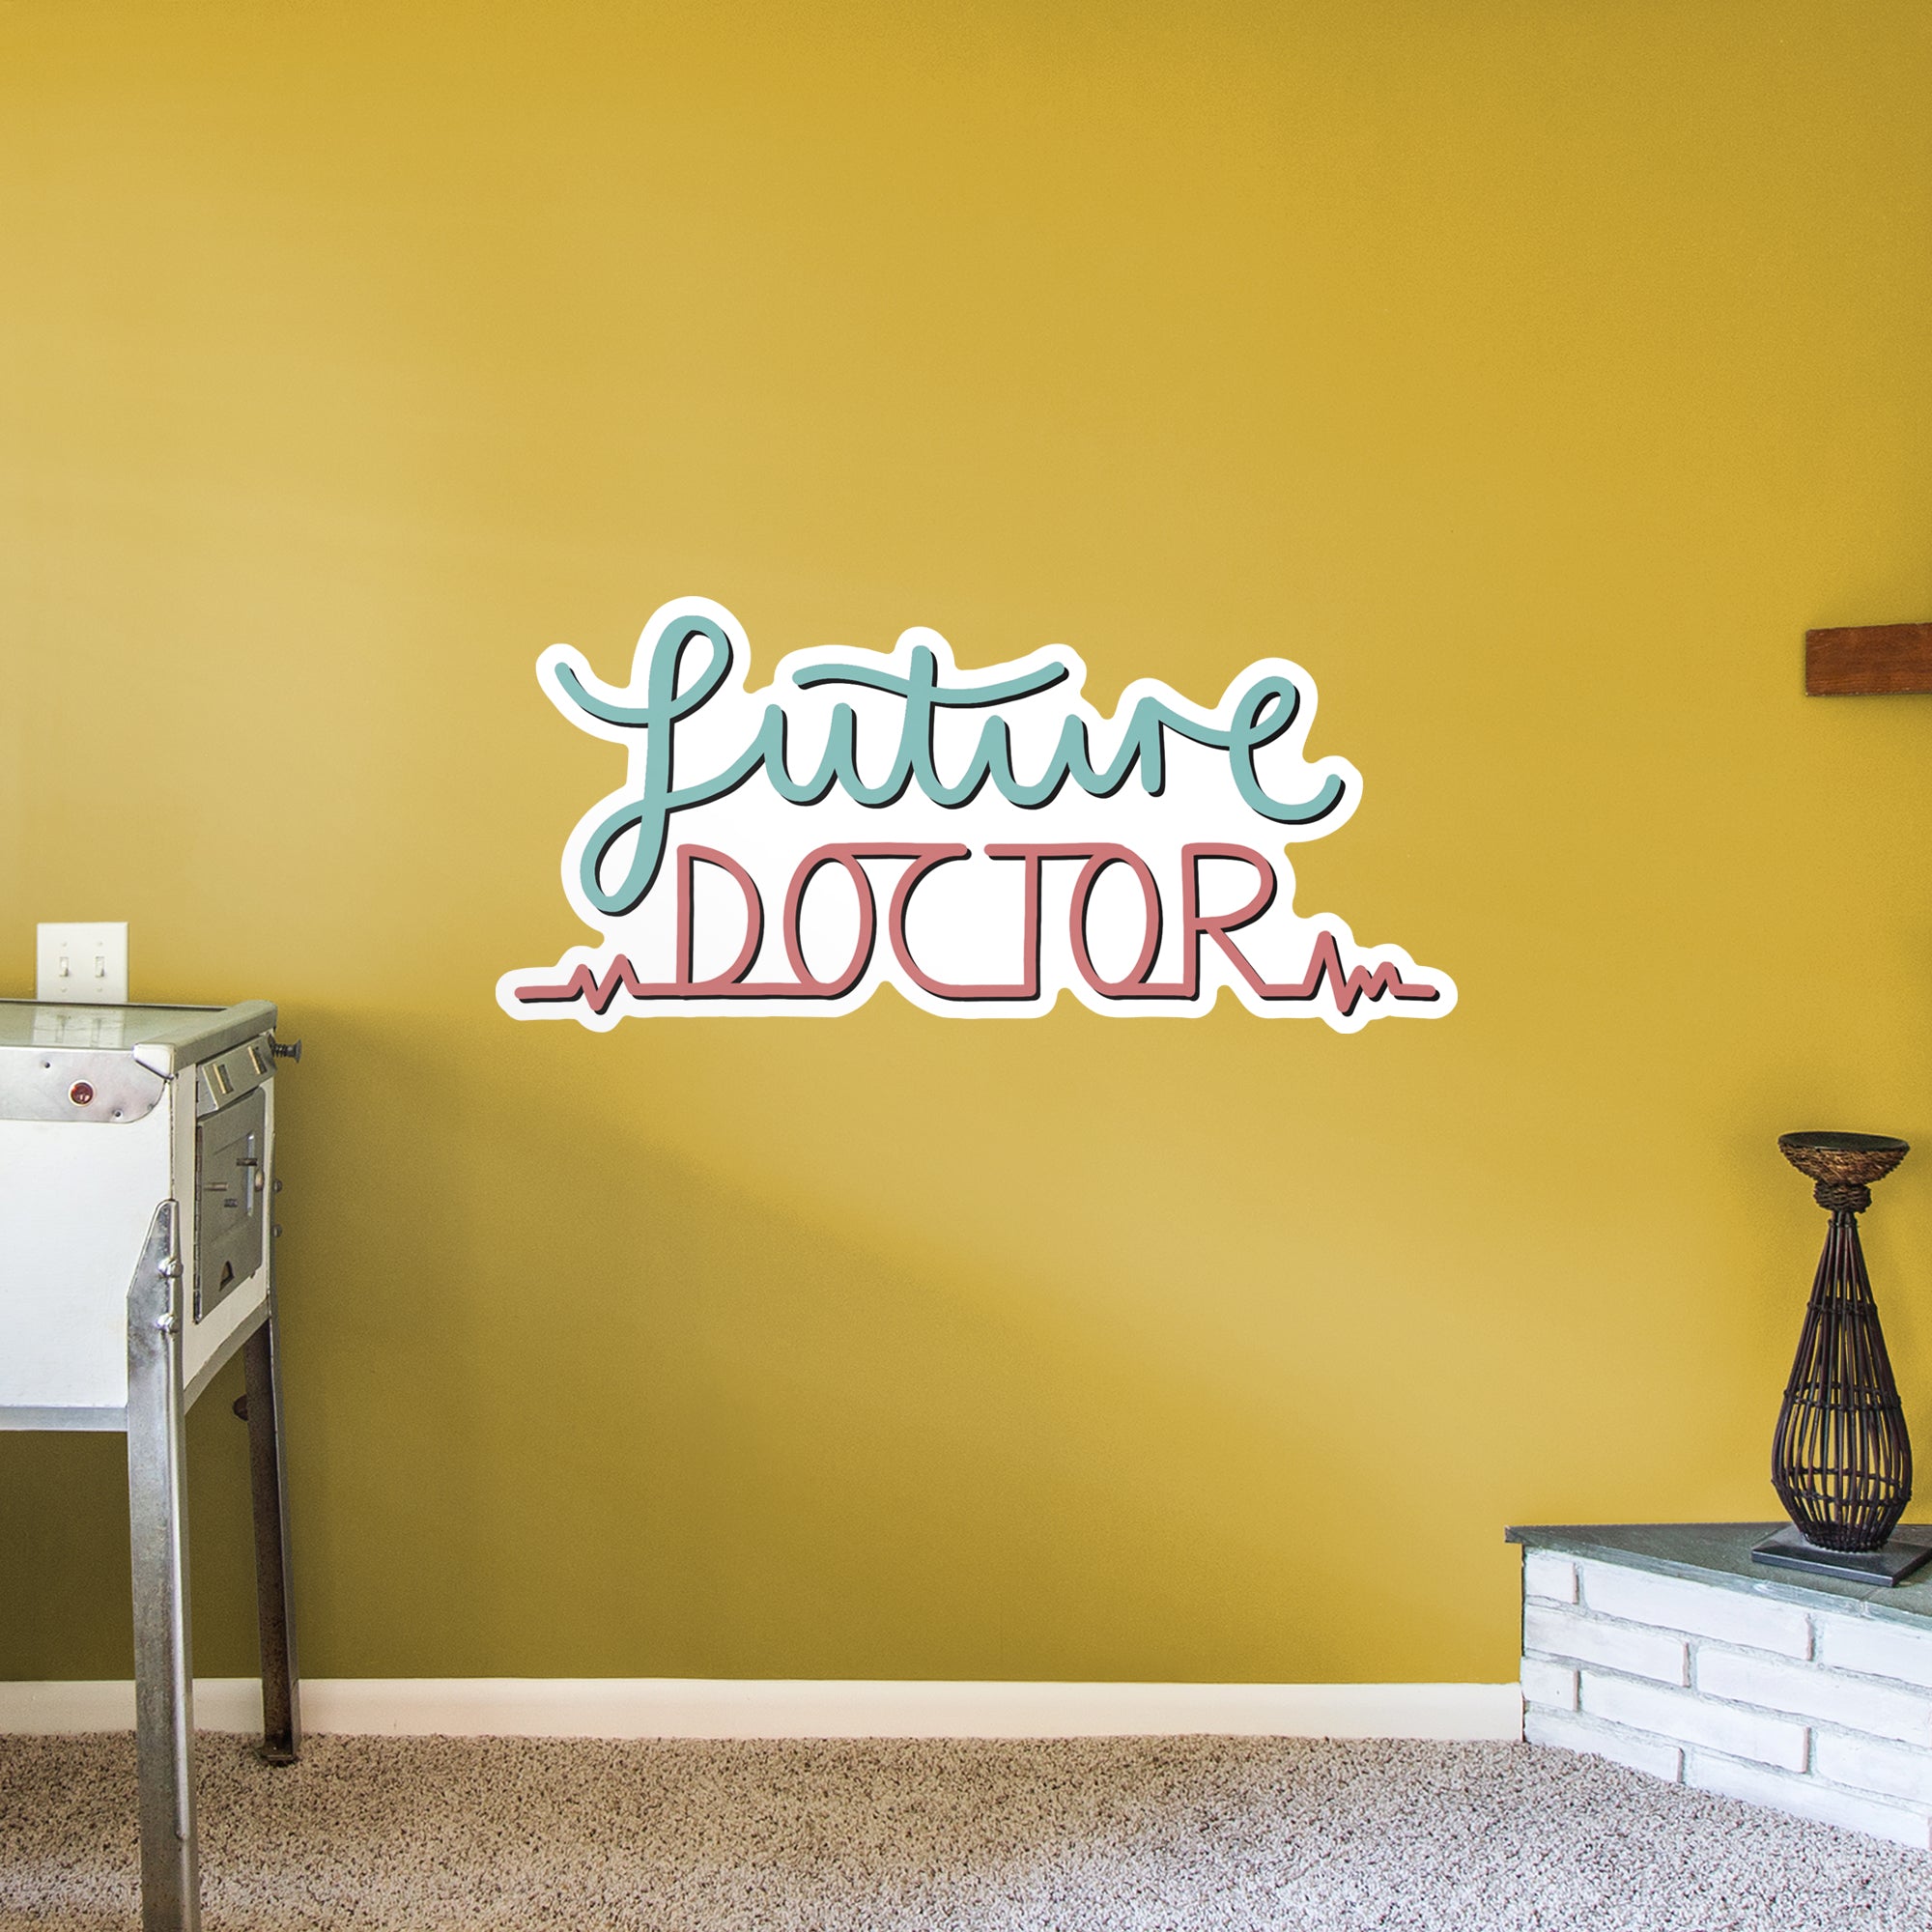 Future Doctor - Officially Licensed Big Moods Removable Wall Decal Giant Decal (23"W x 50"H) by Fathead | Vinyl